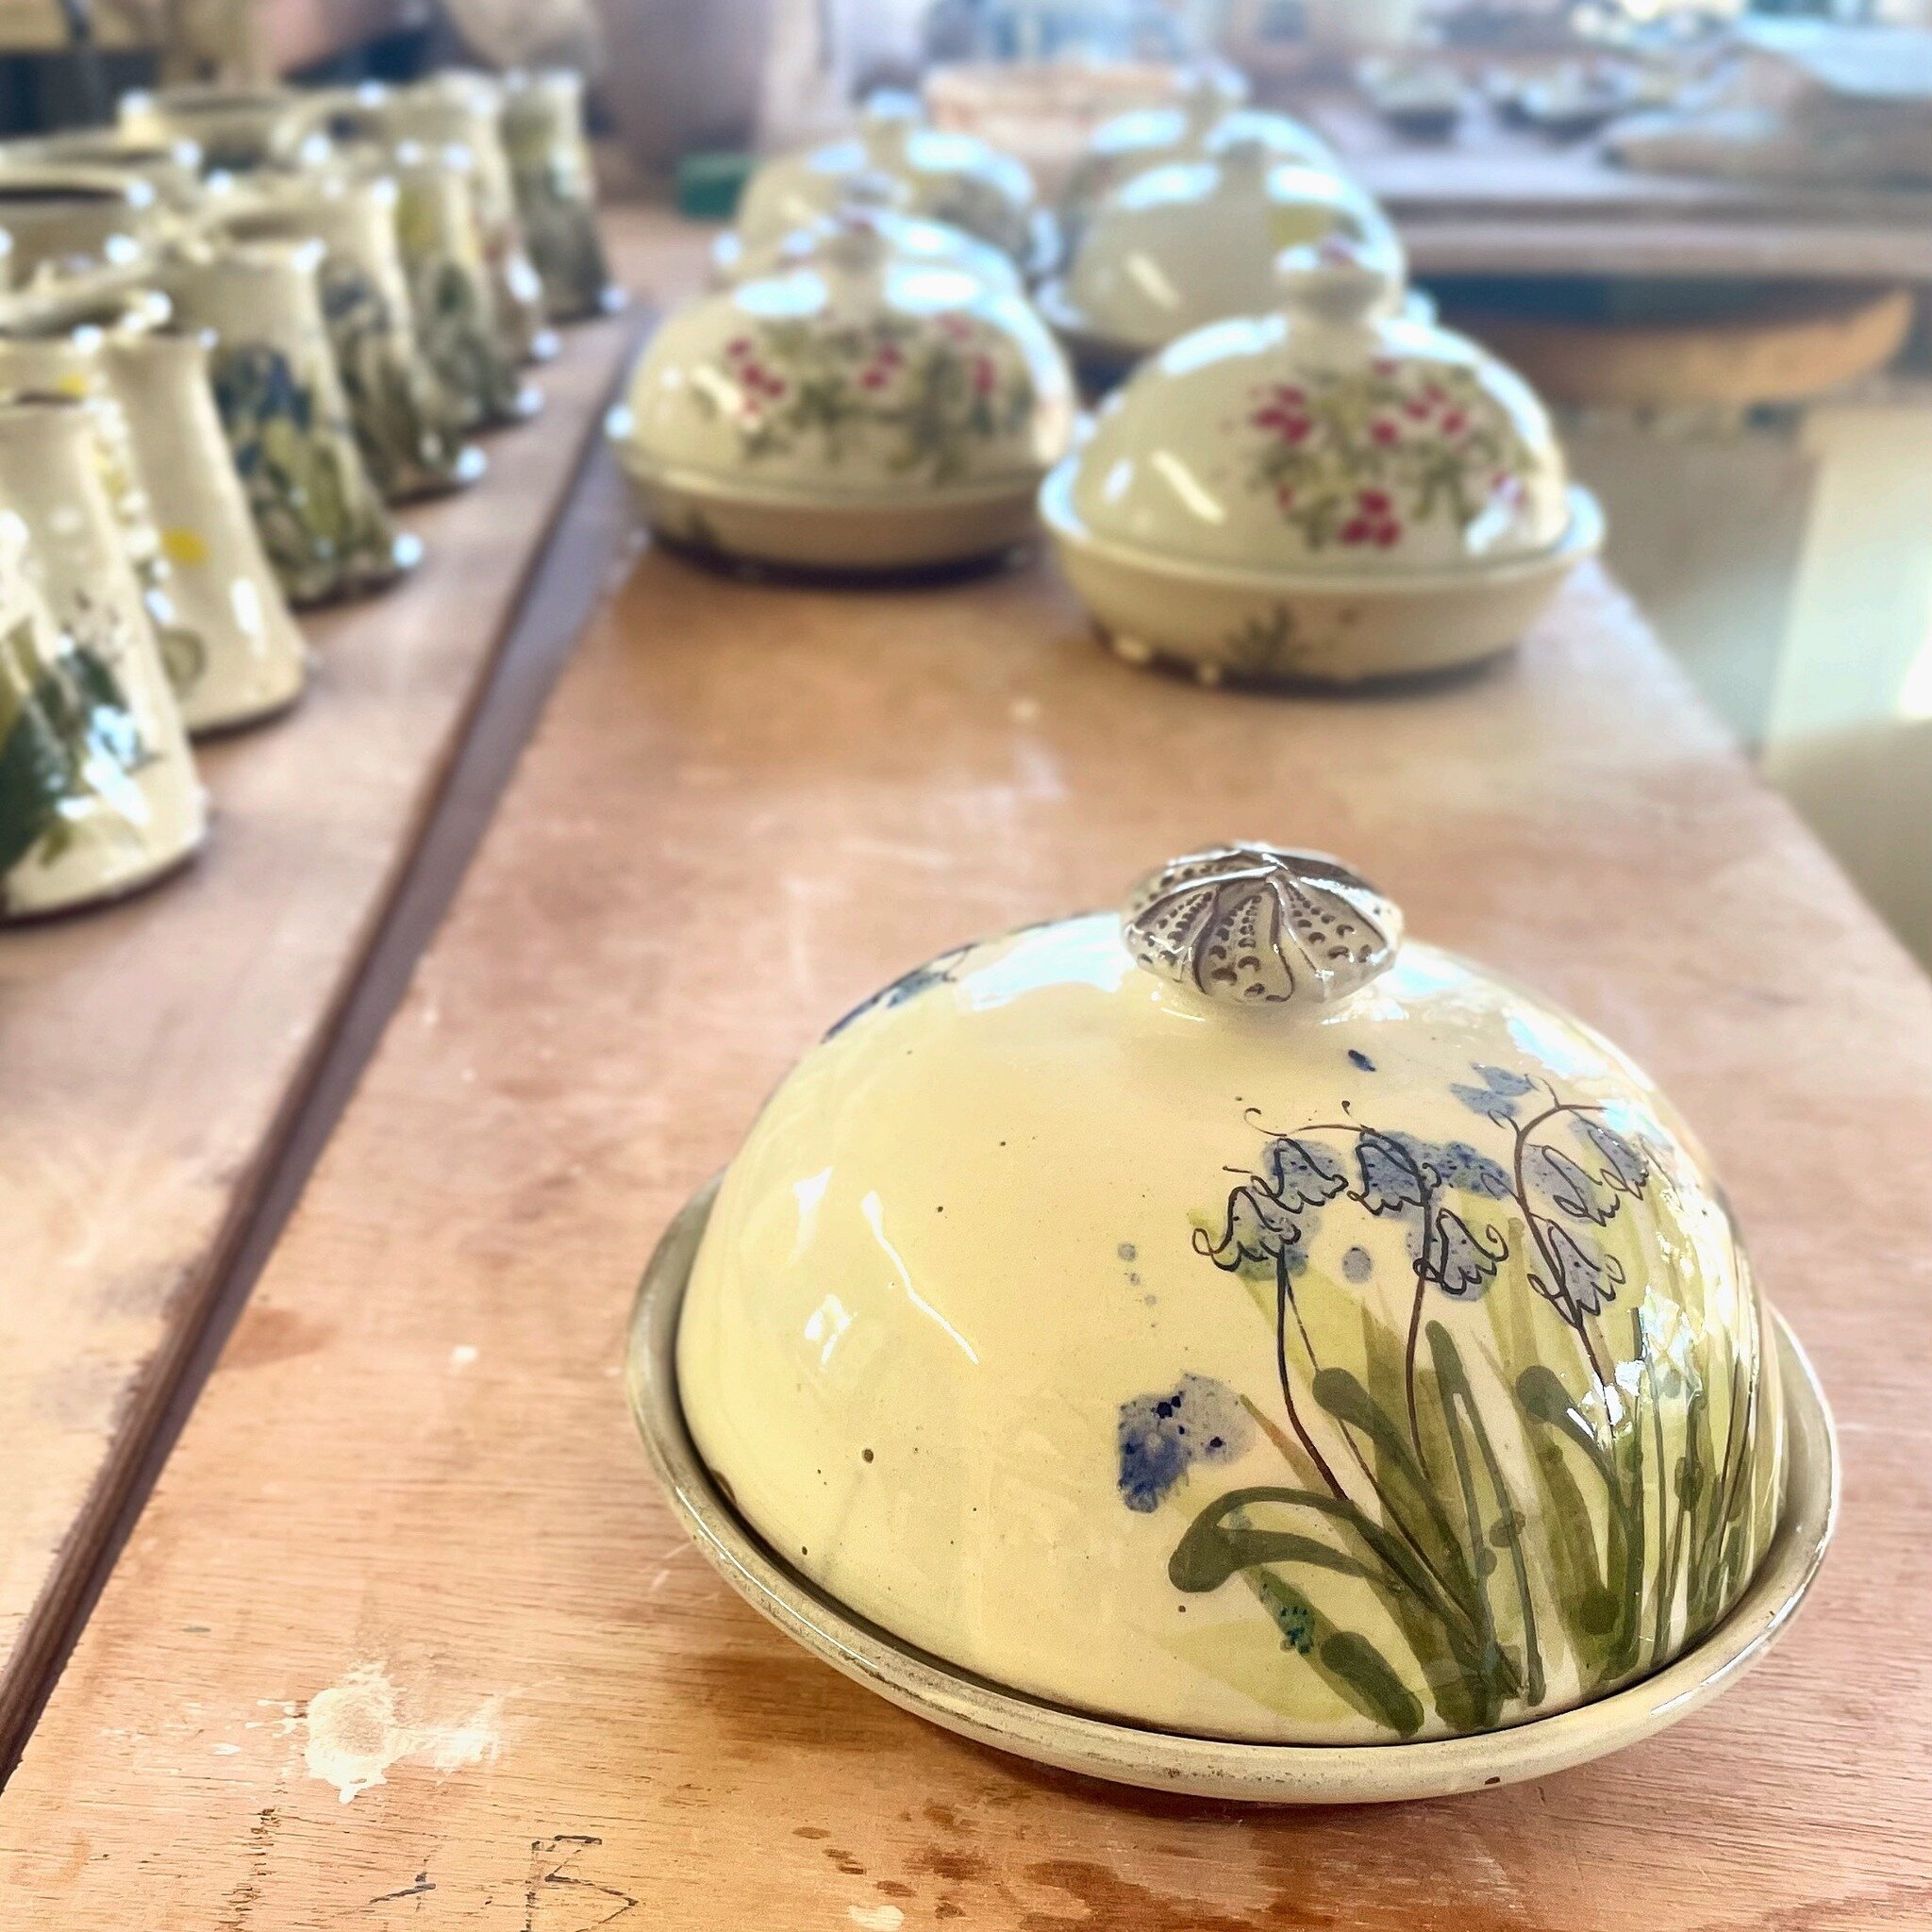 Delighted that these butterdomes and a collection of other pieces will be soon be available at @aberfeldywatermill. They will be part of &lsquo;Anew&rsquo; which opens on March 15th.

With thanks to the lovely @rosiehayceramics who will be delivering